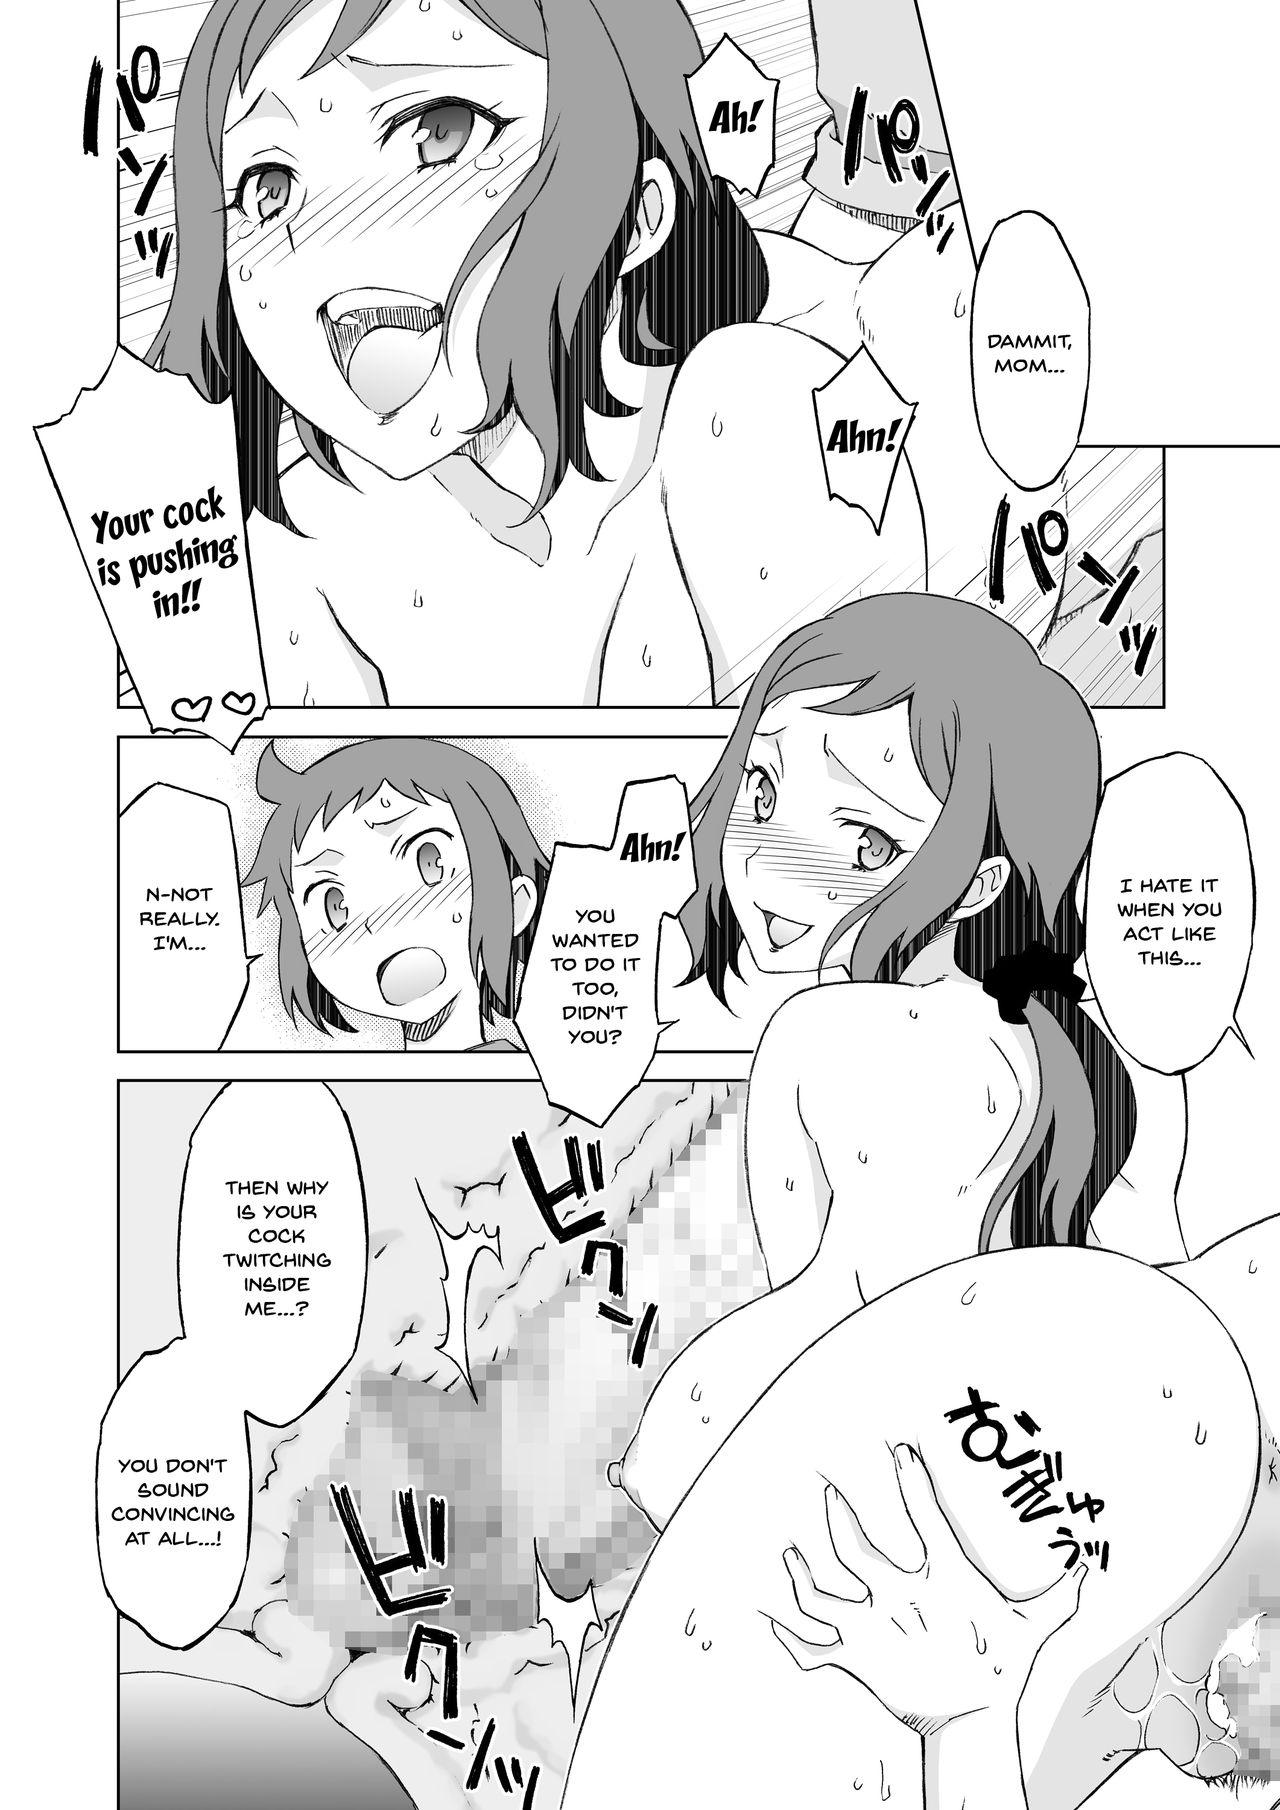 Lesbian Porn Build Fuckers 2 - Gundam build fighters Body - Page 6